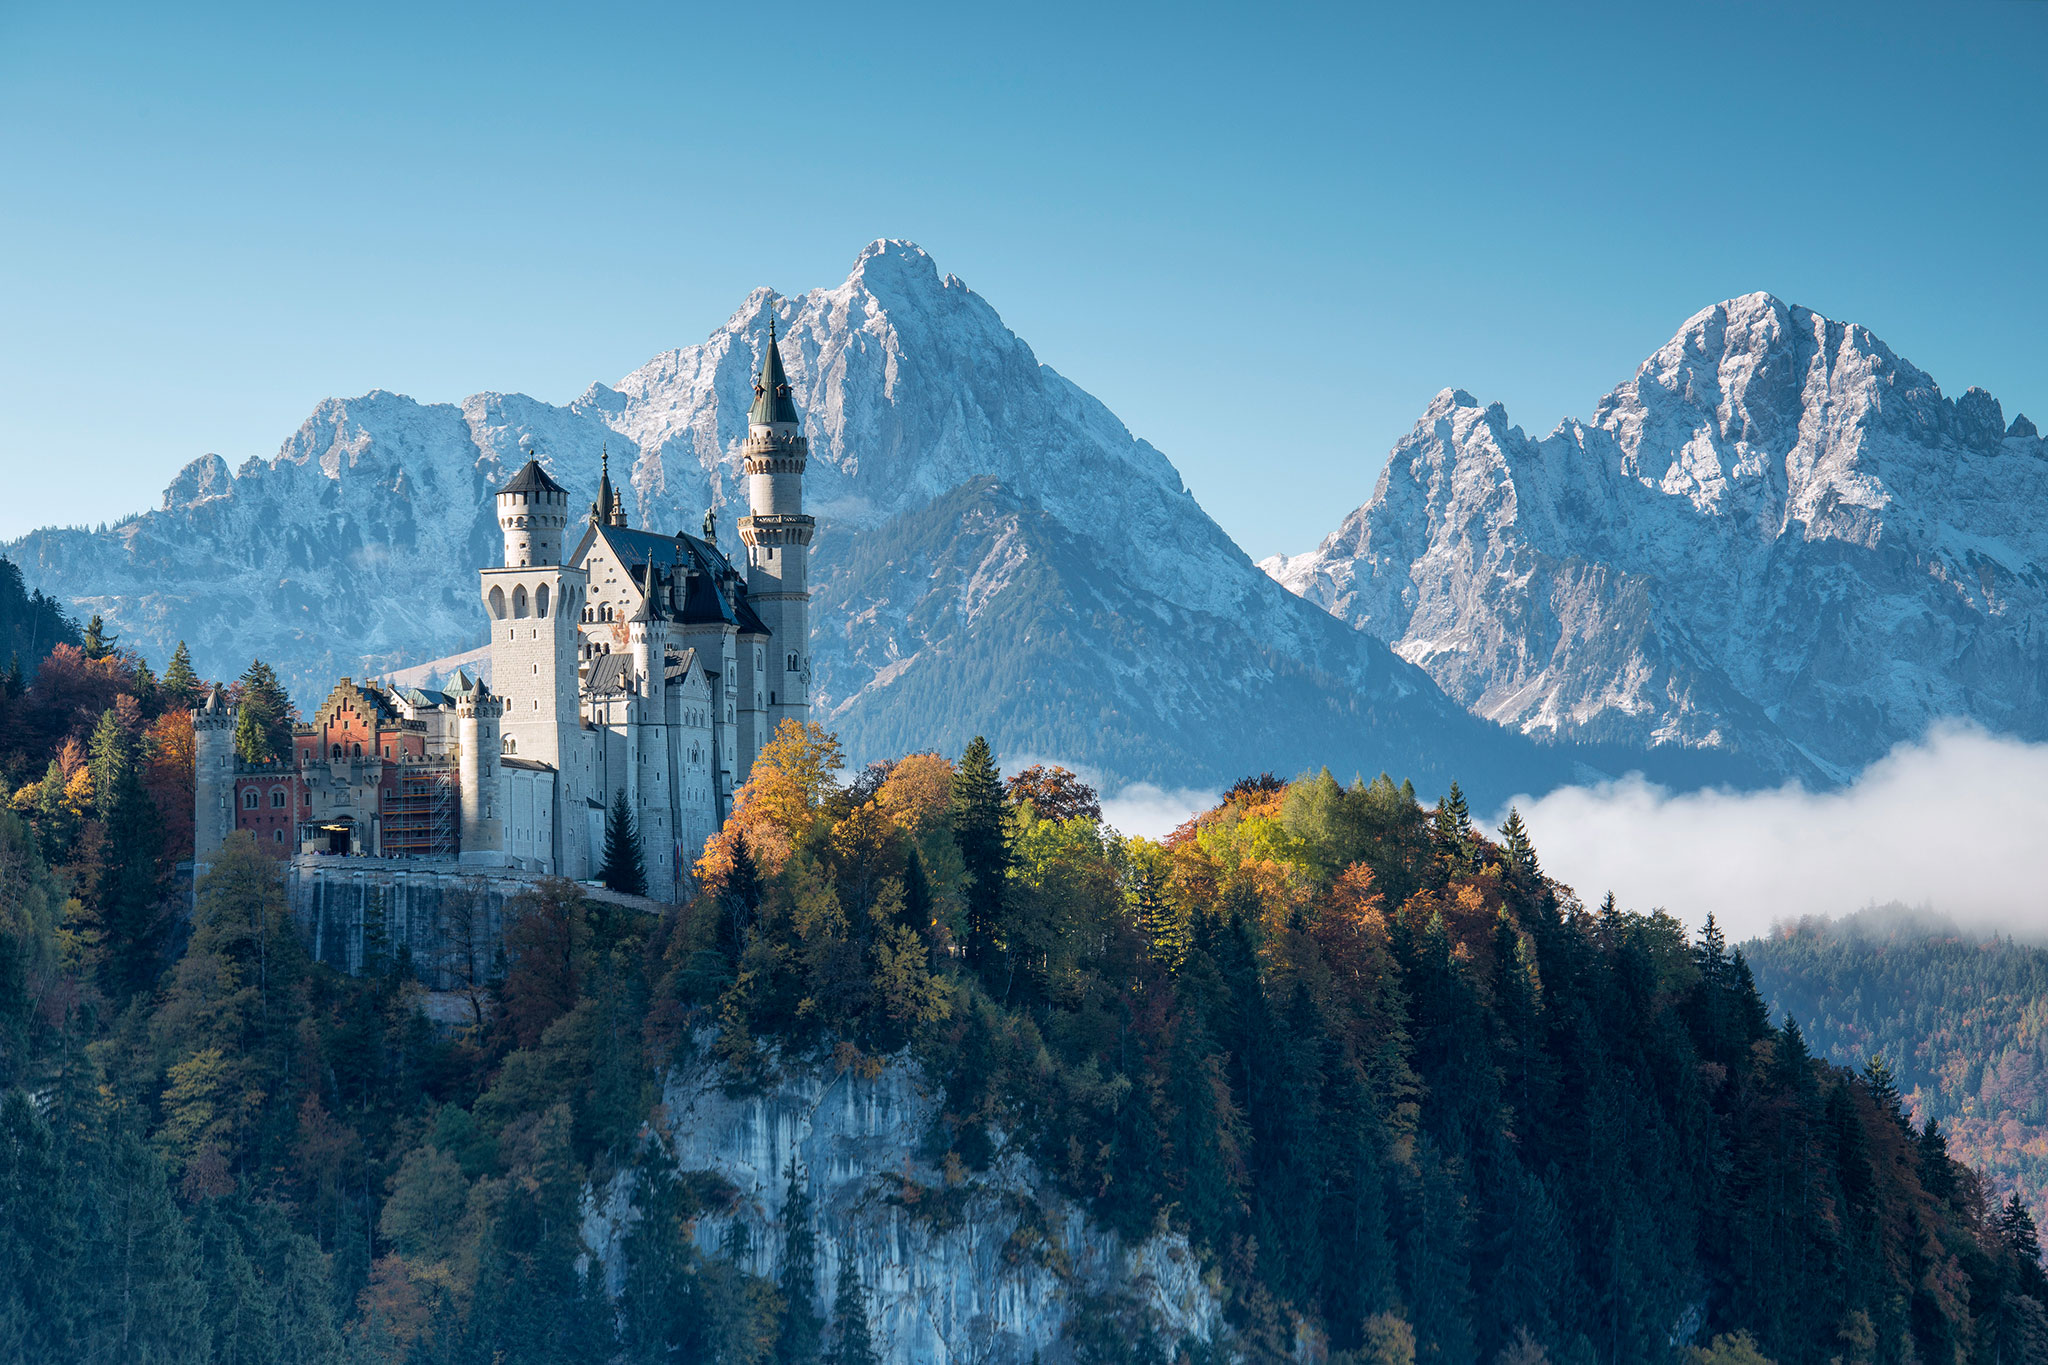 Neuschwanstein is the Most Visited Castle in Germany